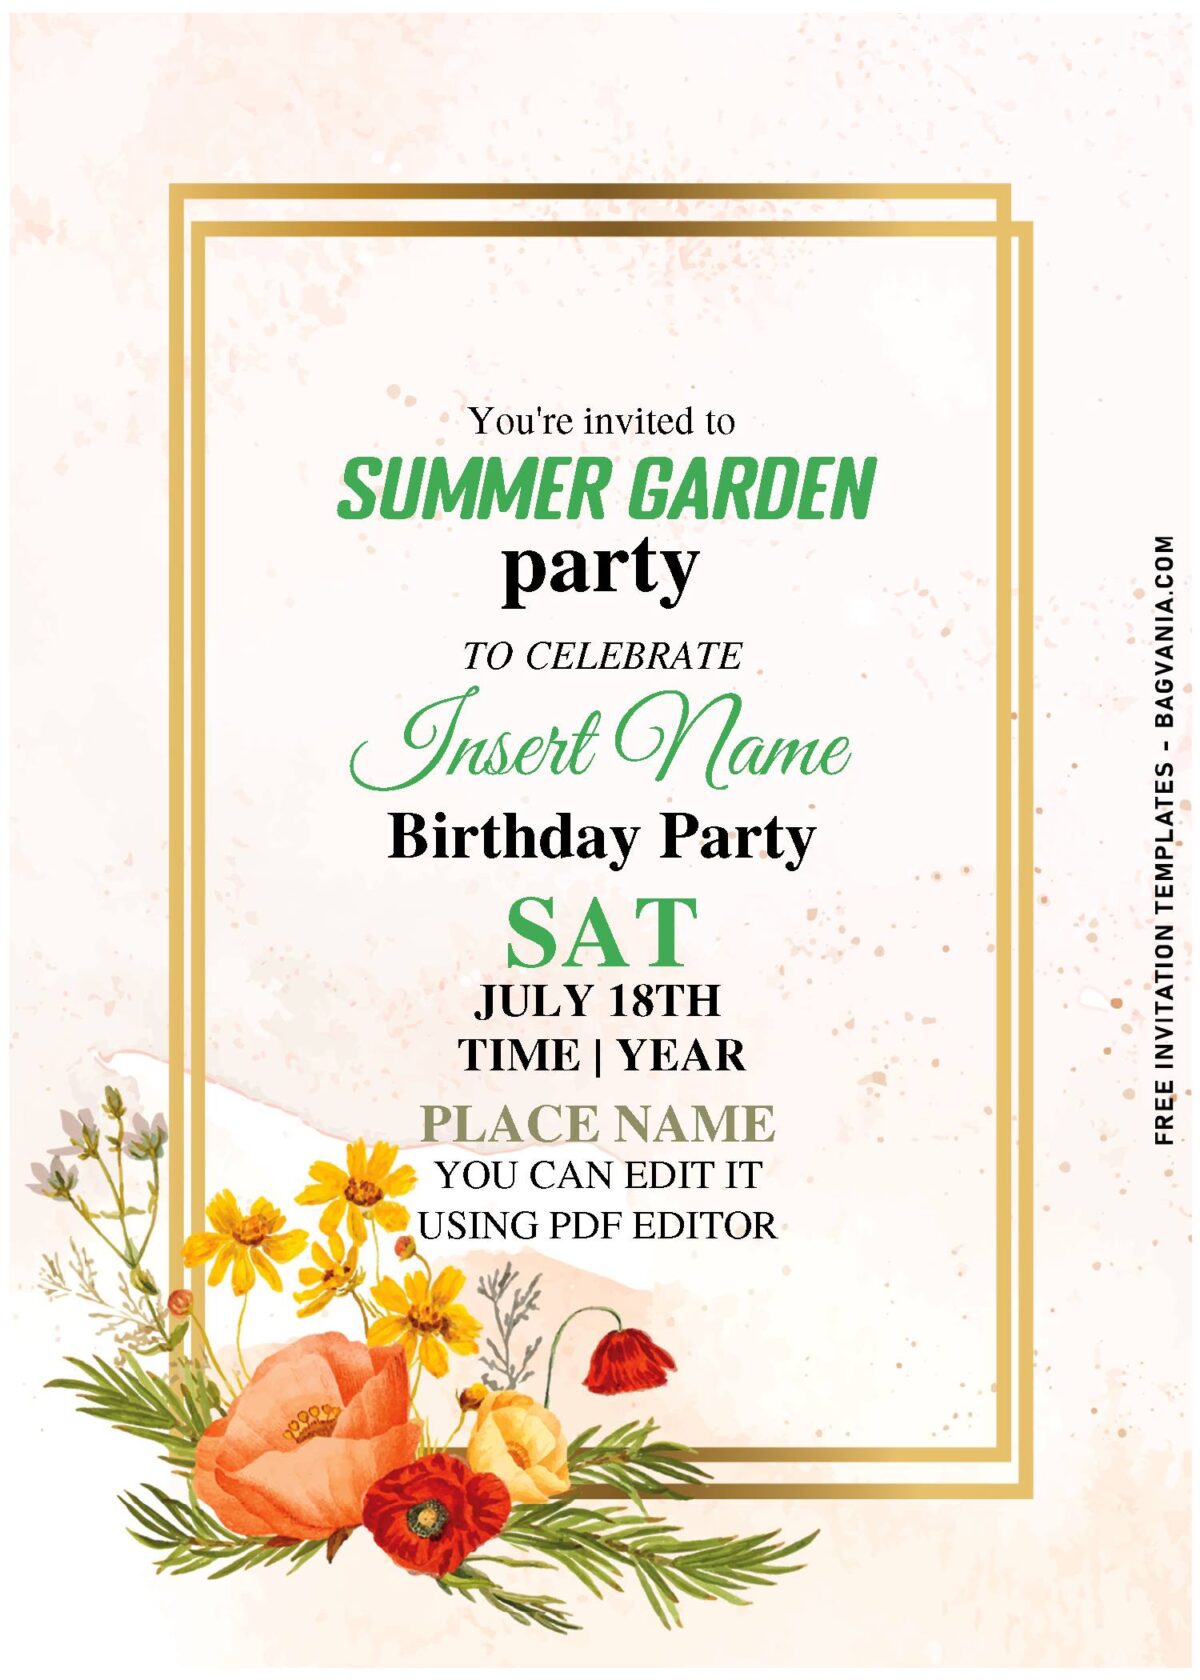 (Free Editable PDF) Vintage Gold And Watercolor Spring Flower Birthday Invitation Templates with yellow sunflower